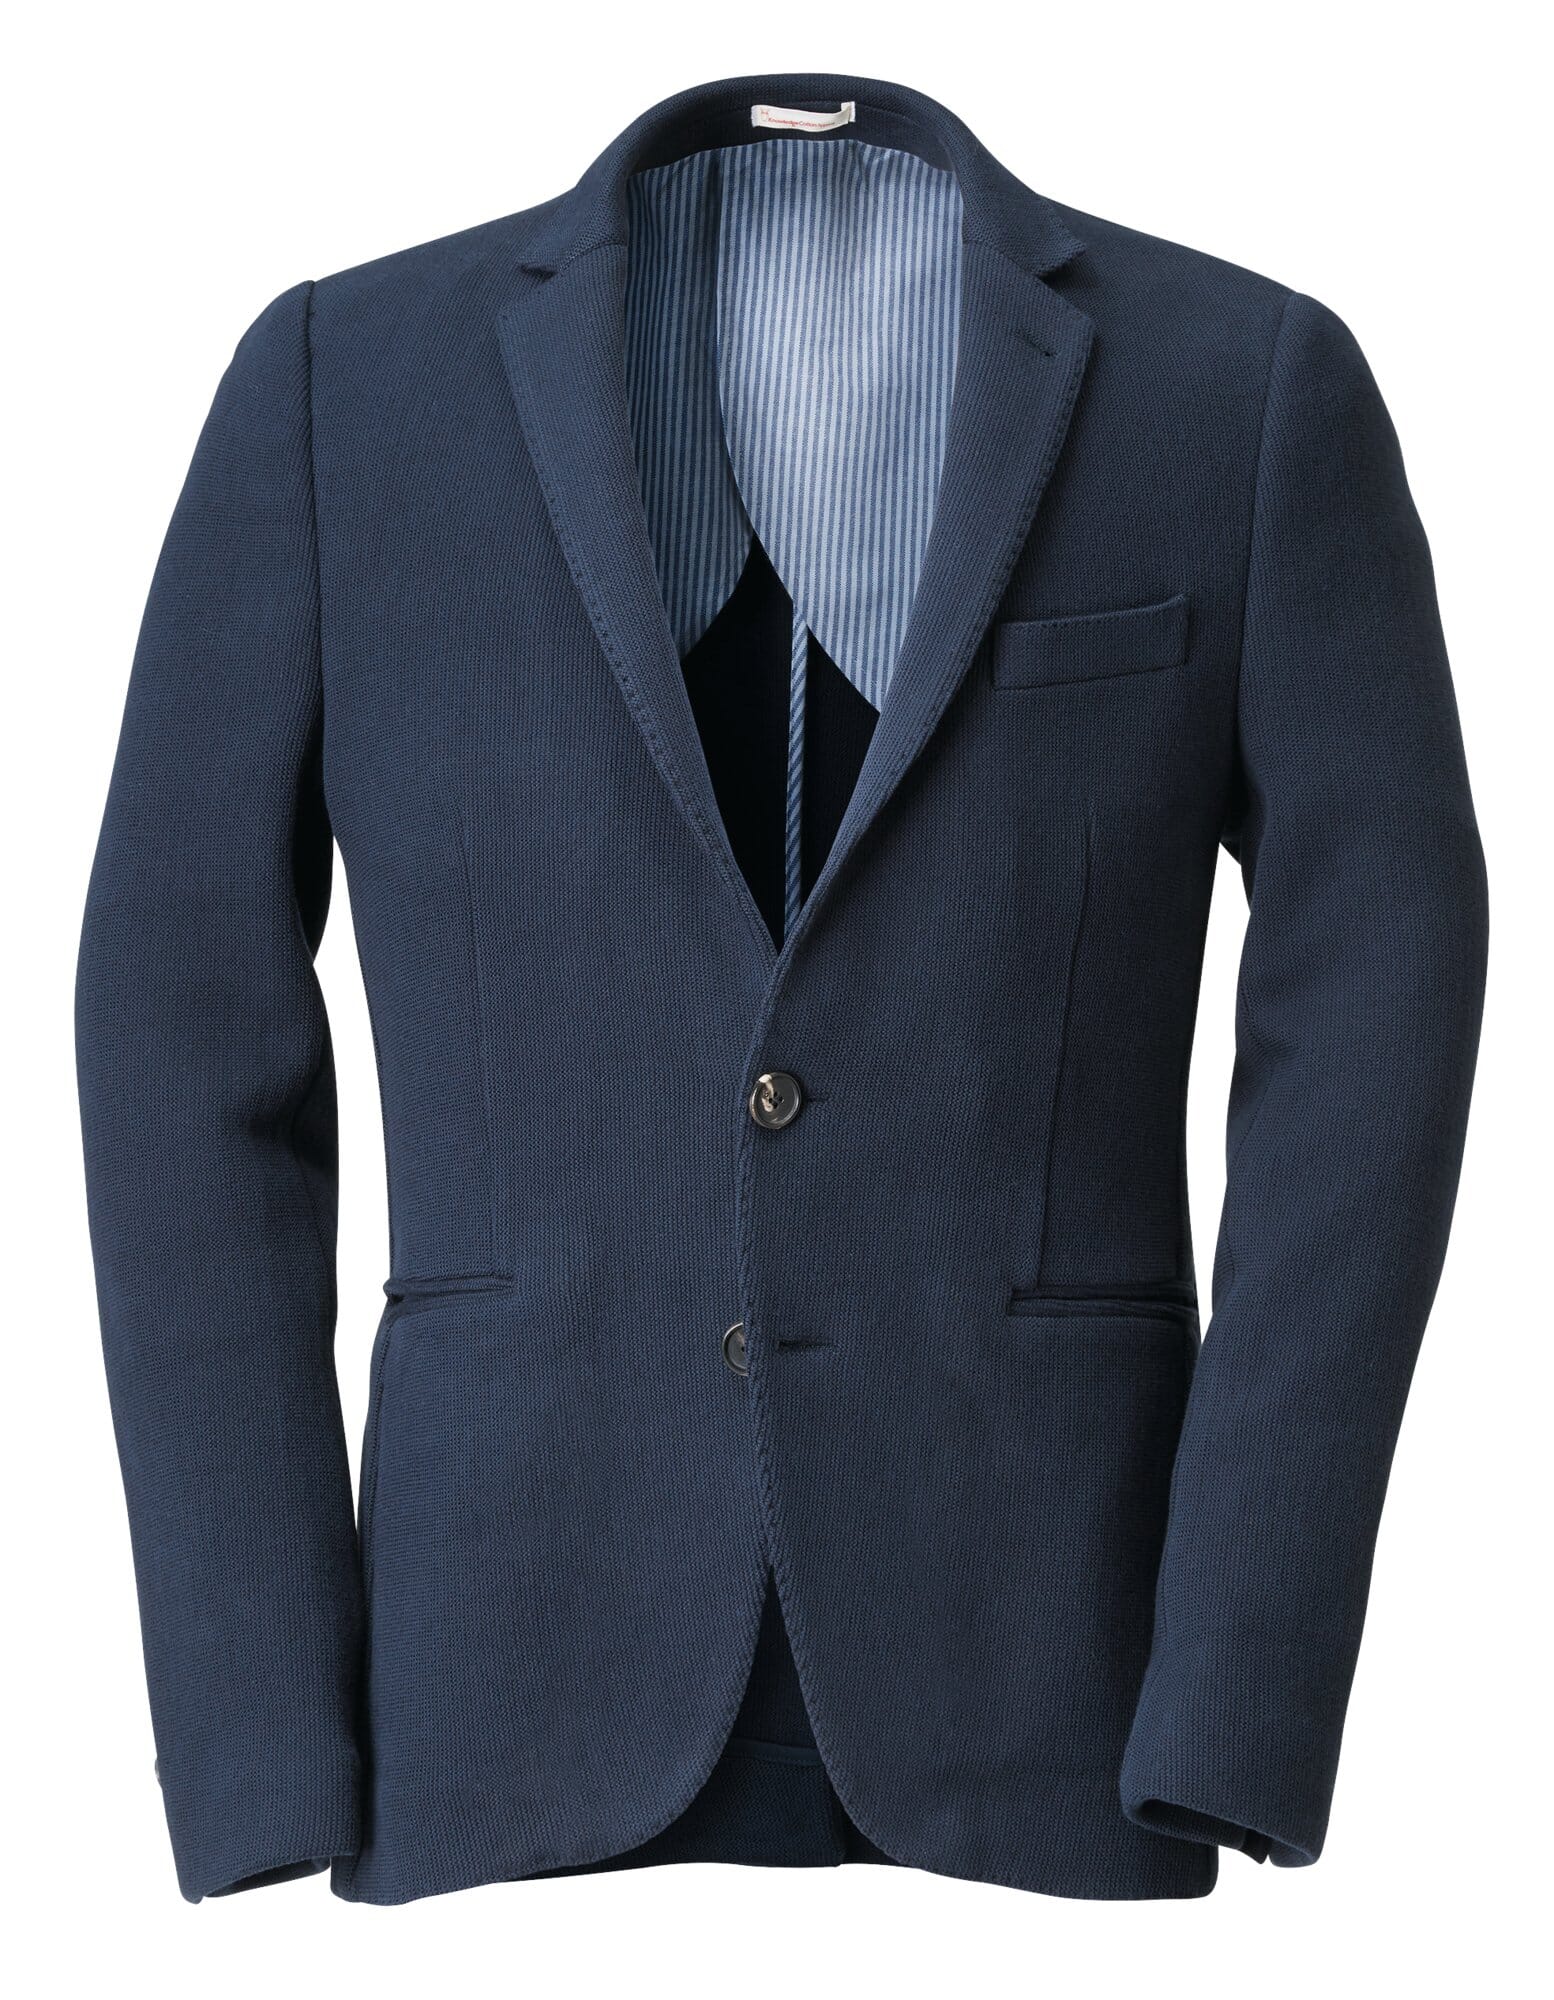 en anden side strand Knitted Jacket by Knowledge Cotton Apparel, Blue | Manufactum